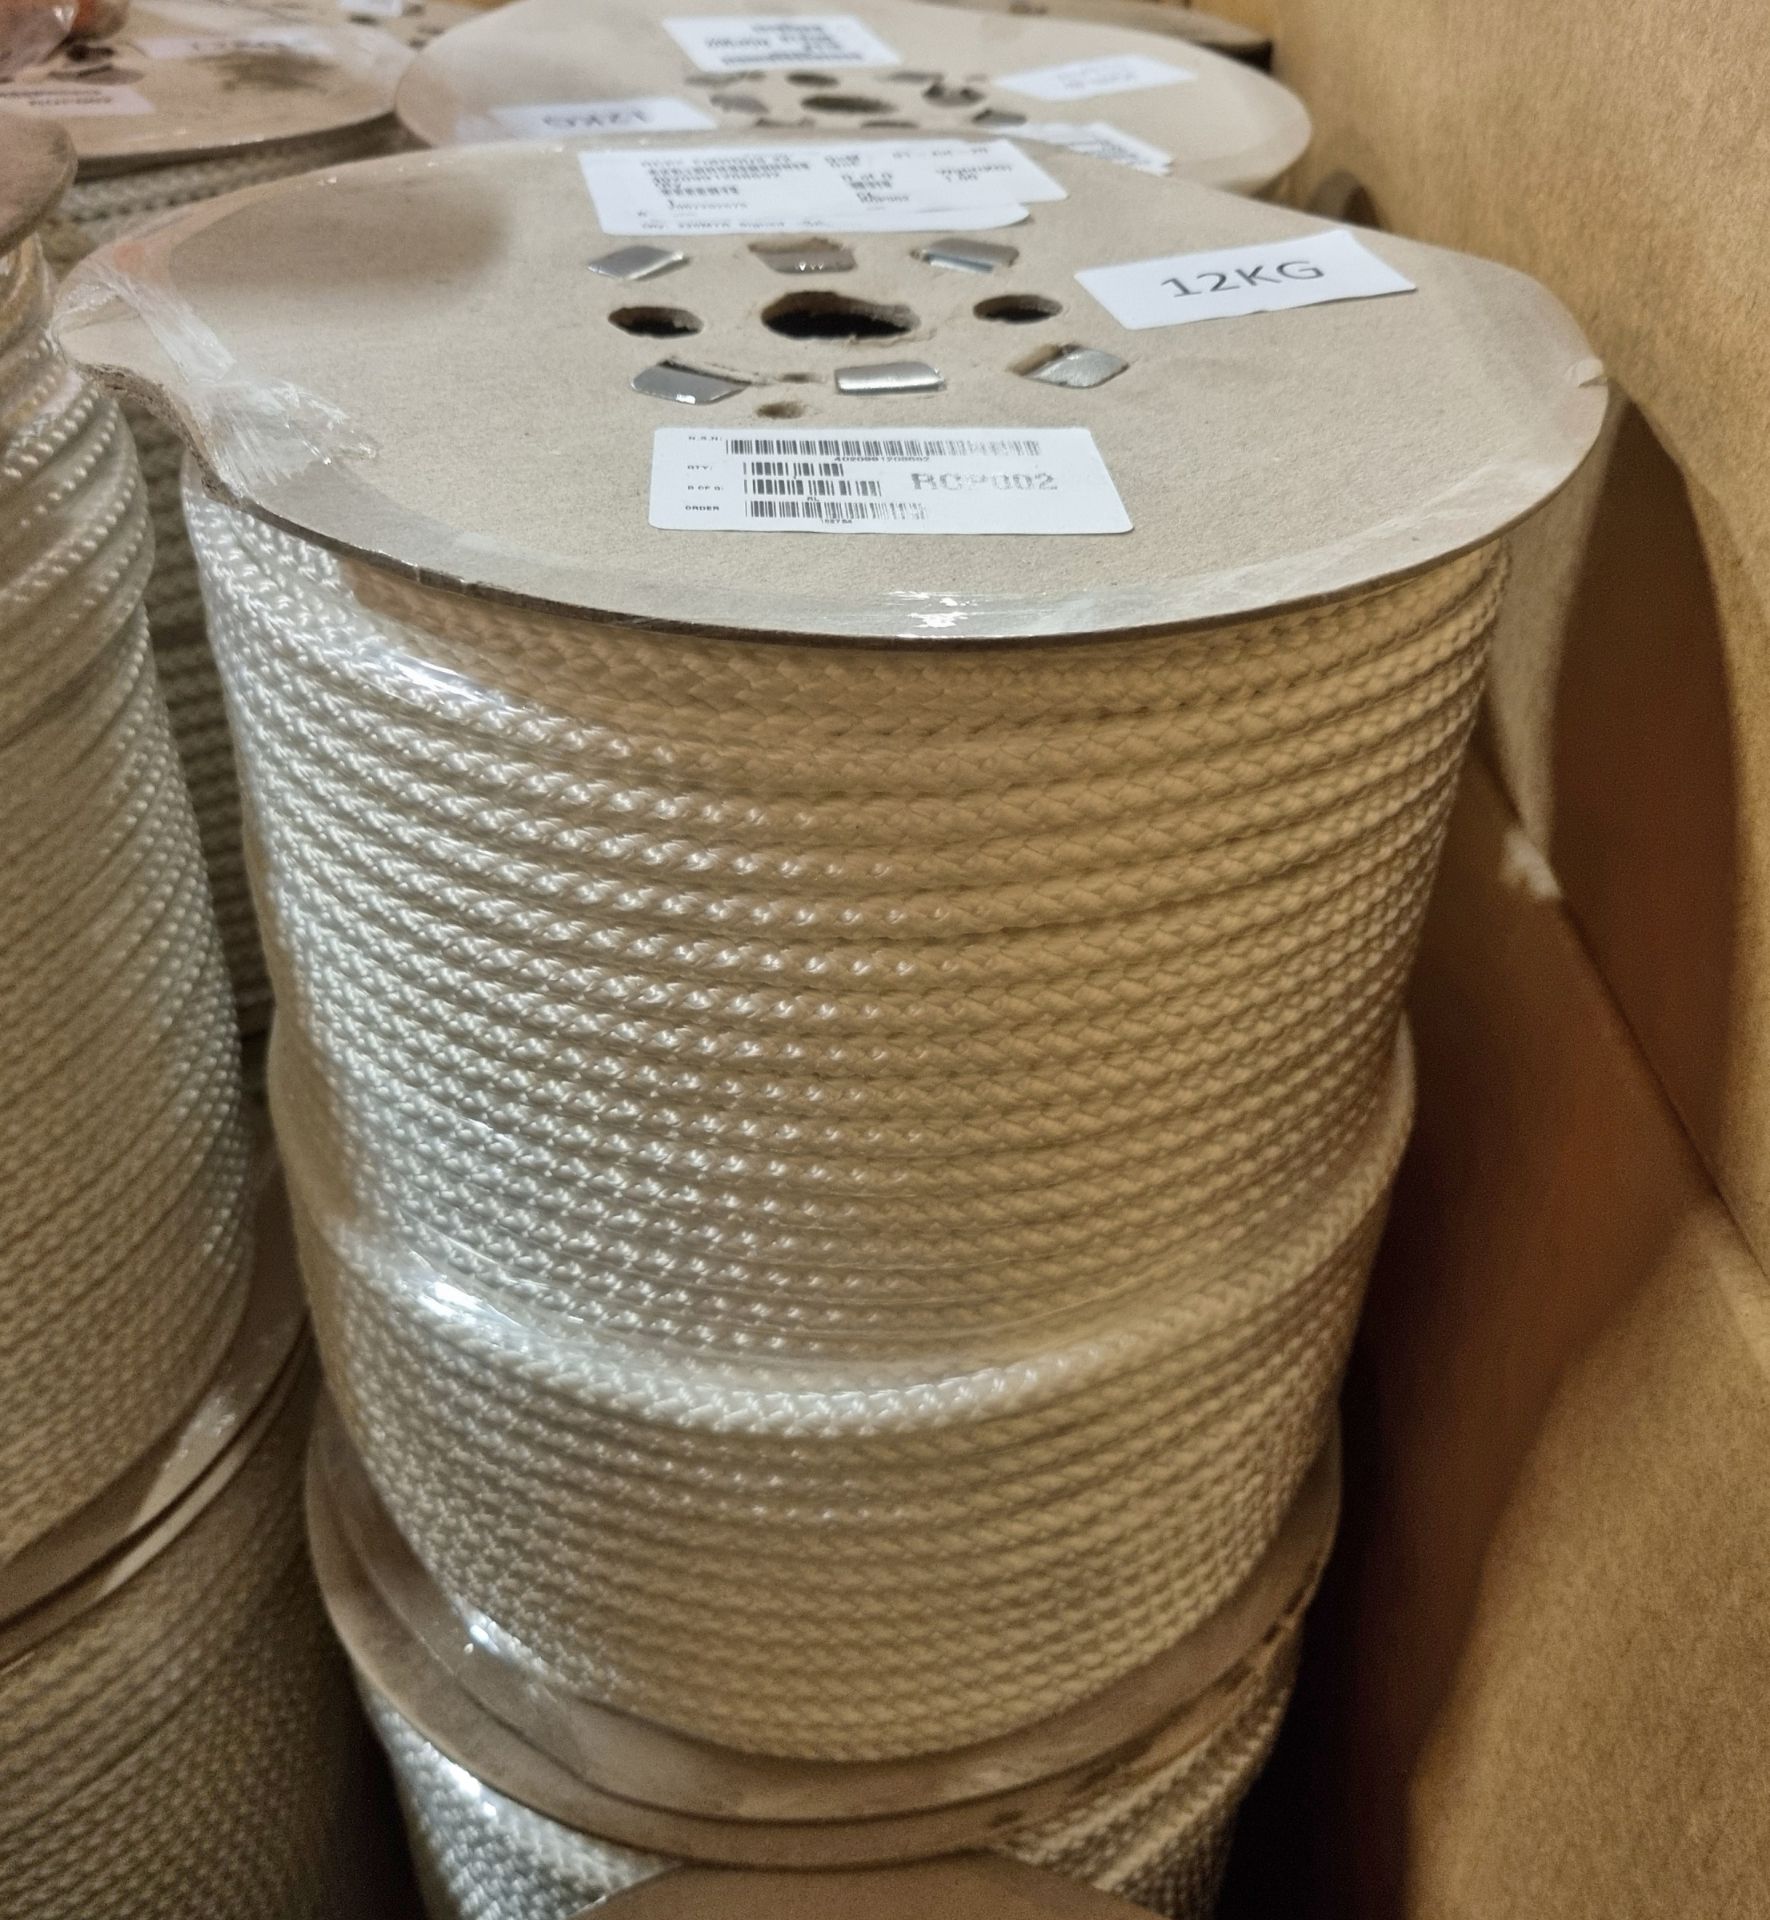 23x reels of white Poly fibrous rope - 22m x 9m, 4x reels of orange buoyant rope - 50 yards - Image 7 of 7